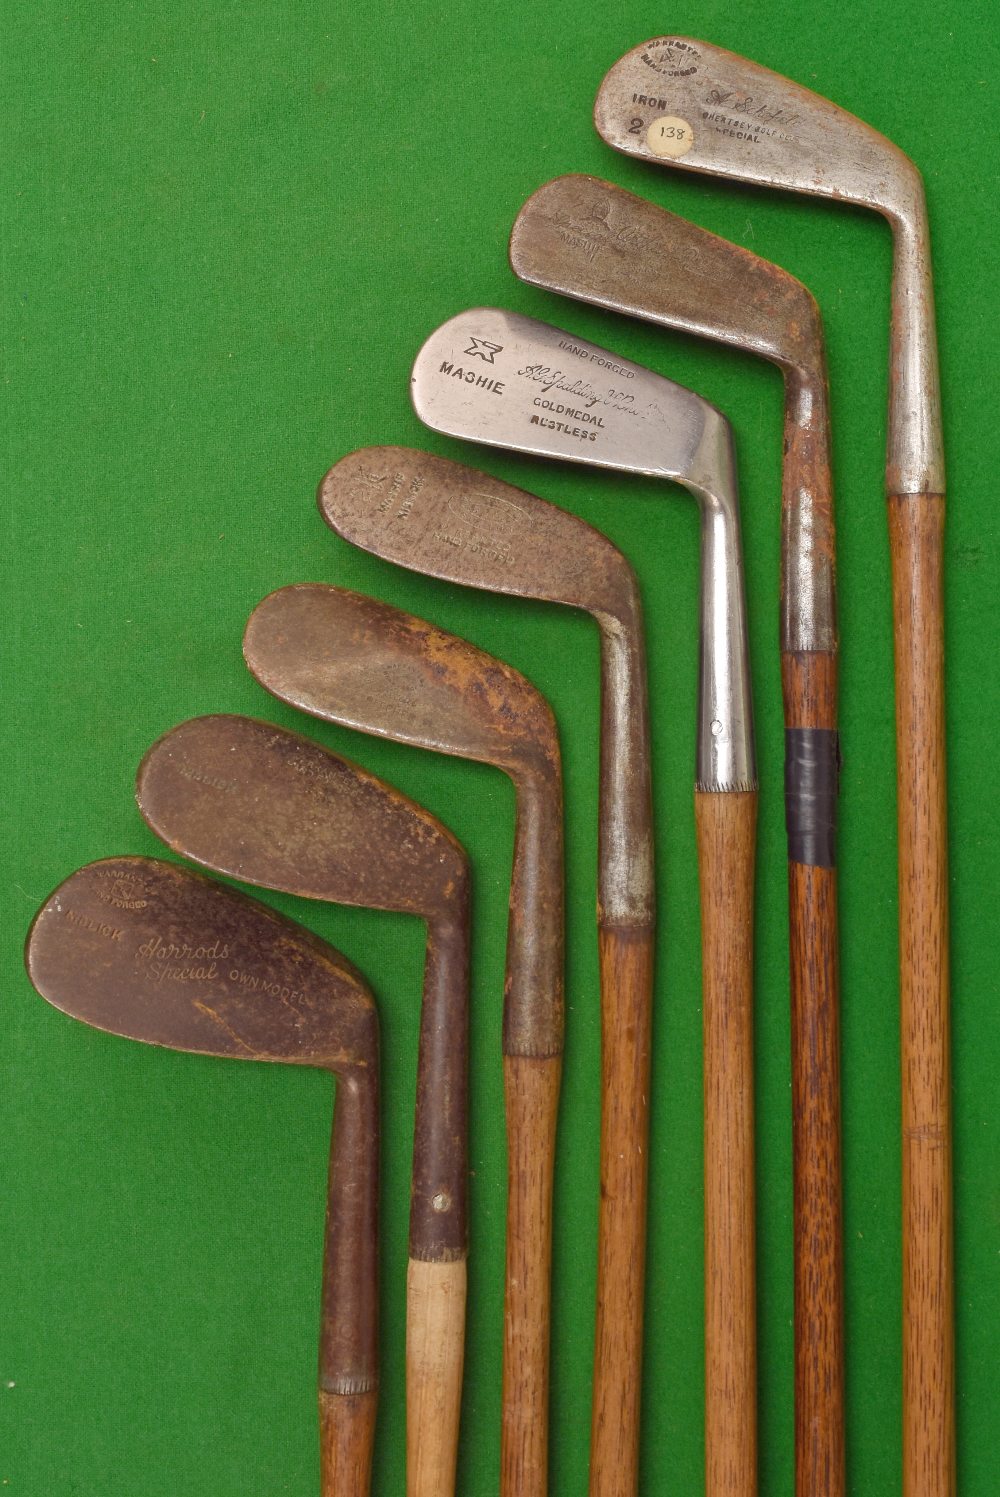 7x assorted irons – Spalding Anvil Mark mashie, Bishop and Hendry Special Round back mashie, Allan